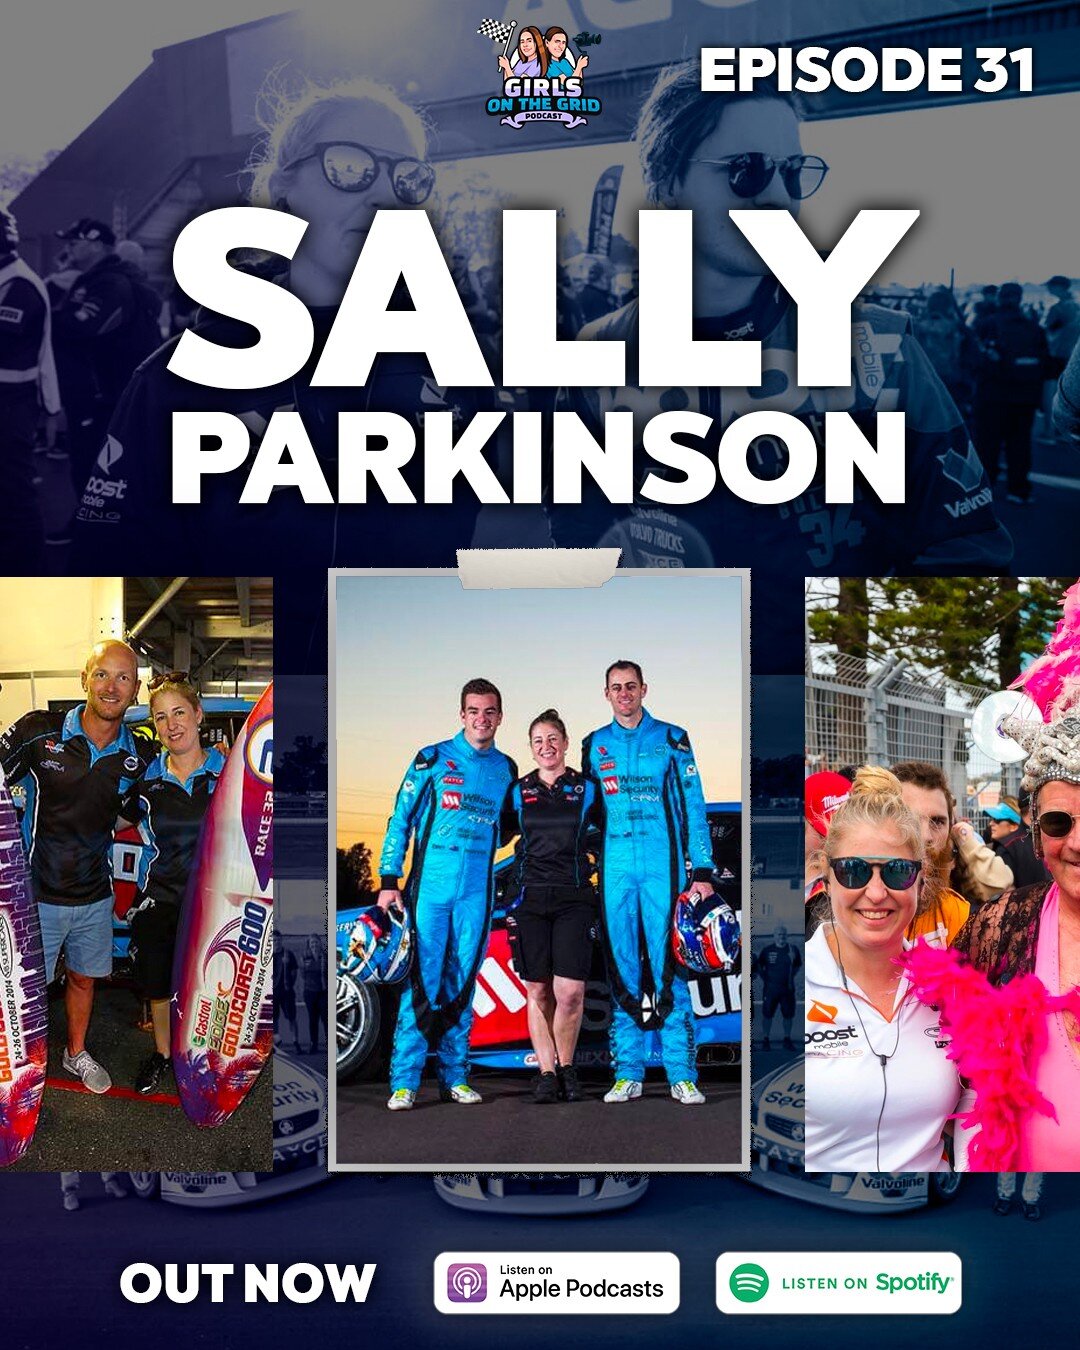 @sallyparkinson&rsquo;s love of motorsport started when he Dad used to race cars against her future boss, Garry Rogers! In 2009, she landed herself a job at Garry Rogers Motorsport, and she has never looked back. She was there for some huge moments, 